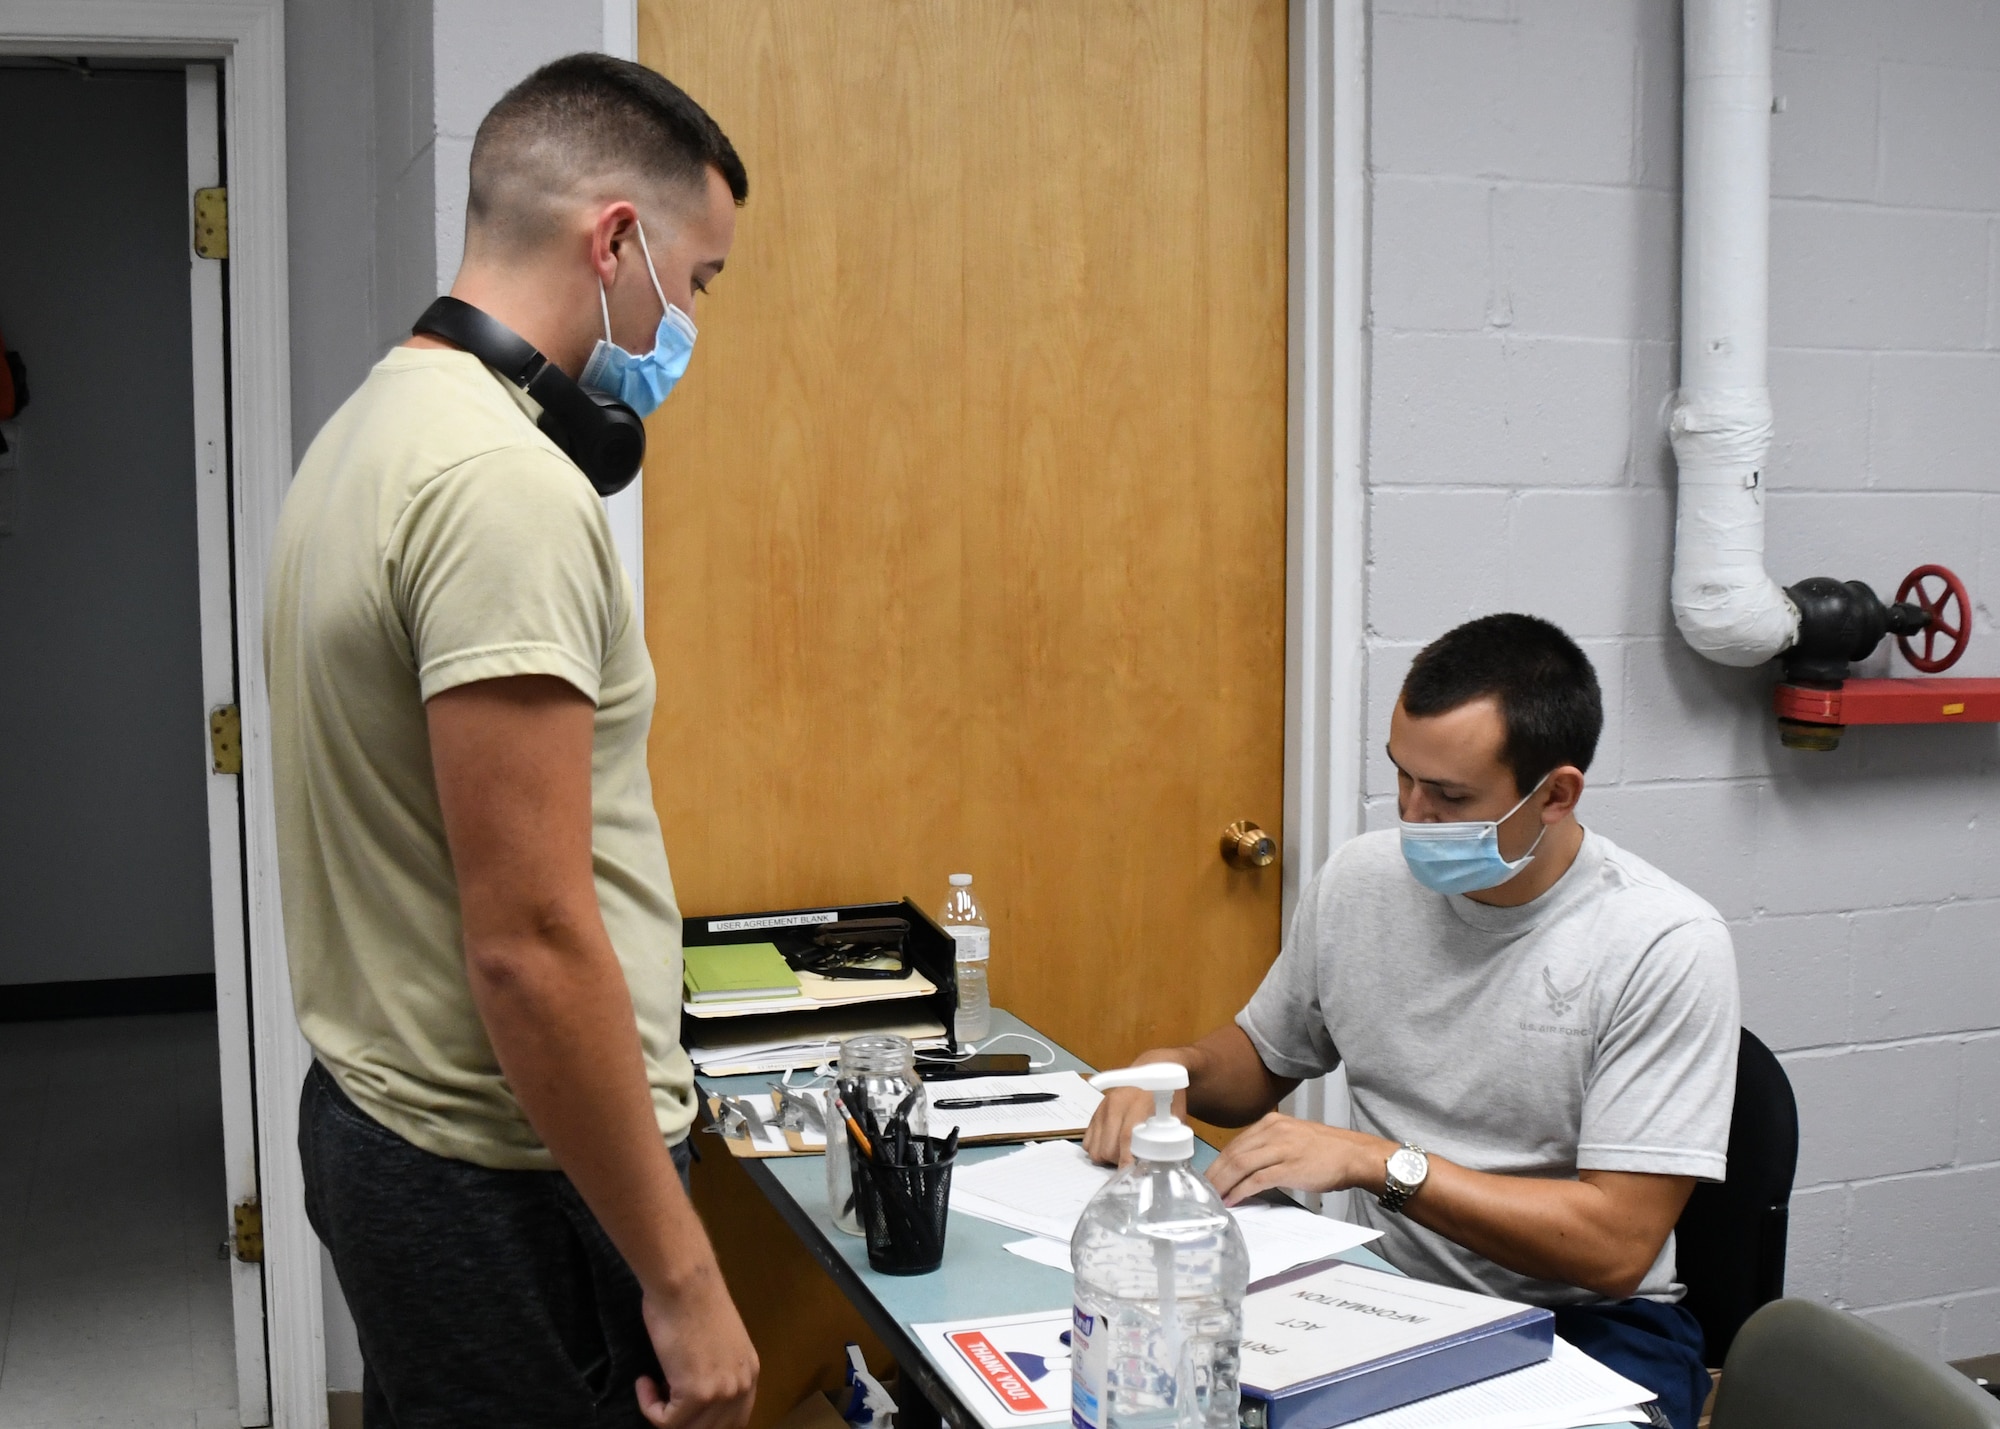 Staff Sgt. Nicholas Nihill, 104th Fighter Wing Fatality Search and Rescue Team Non-Commissioned Officer, signs Airman 1st Class David Buell, 104 FW egress technician, into the base fitness room July 22, 2020, at Barnes Air National Guard Base, Massachusetts. Due to the COVID-19 pandemic, wing members who choose to work out need to sign in and follow stricter guidelines in order to maintain a safe and healthy environment.  (U.S. Air National Guard photo by Senior Airman Sara Kolinski)